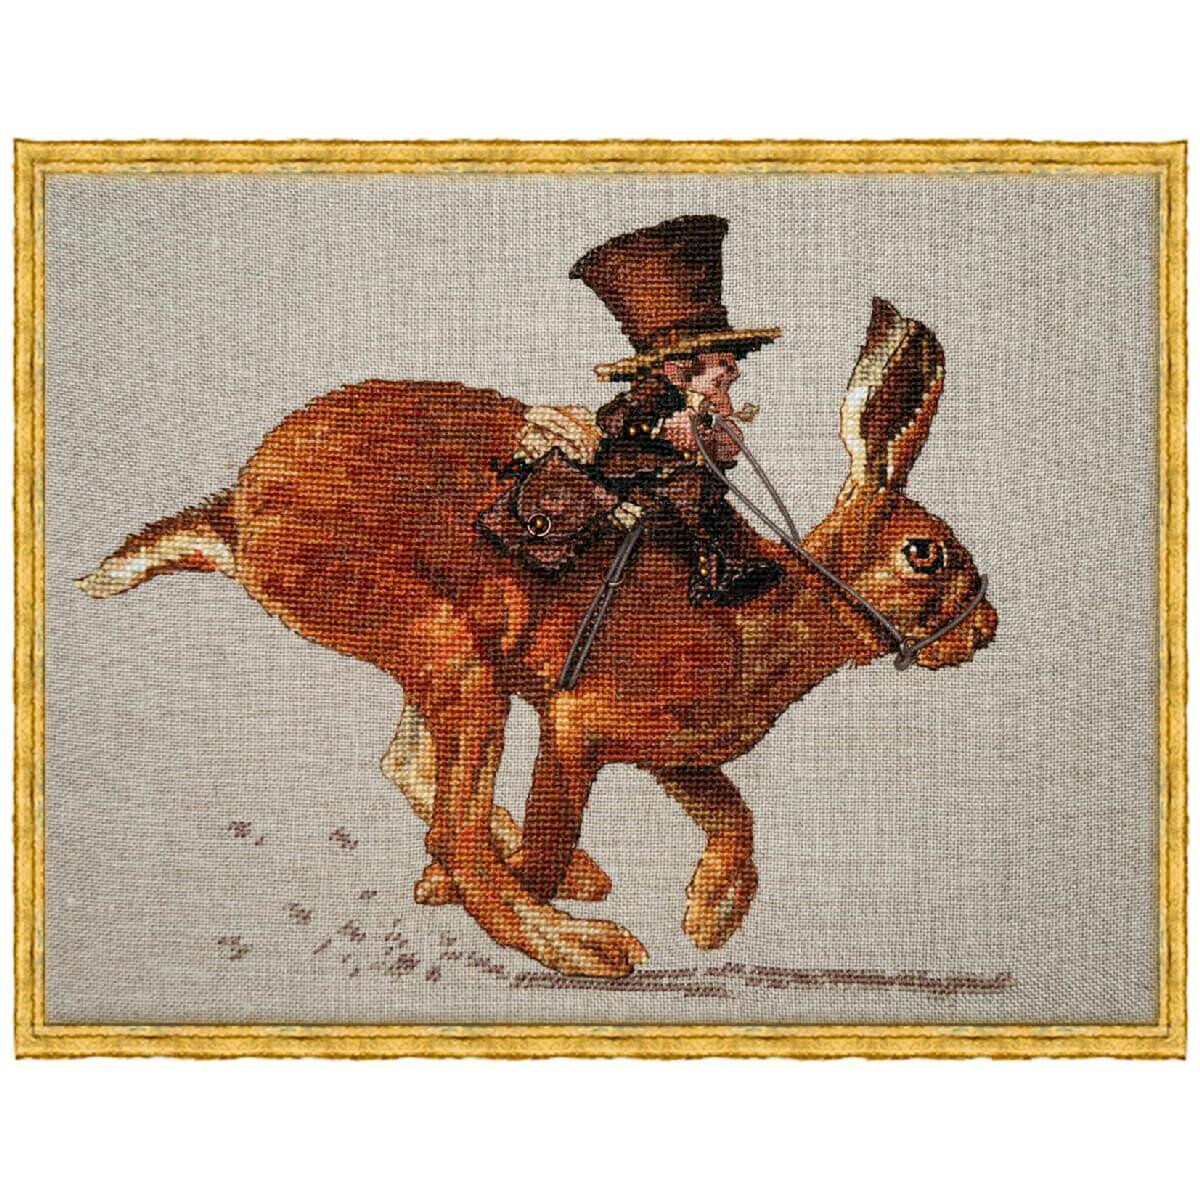 Nimue Cross Stitch counted Chart "The Hare and the...